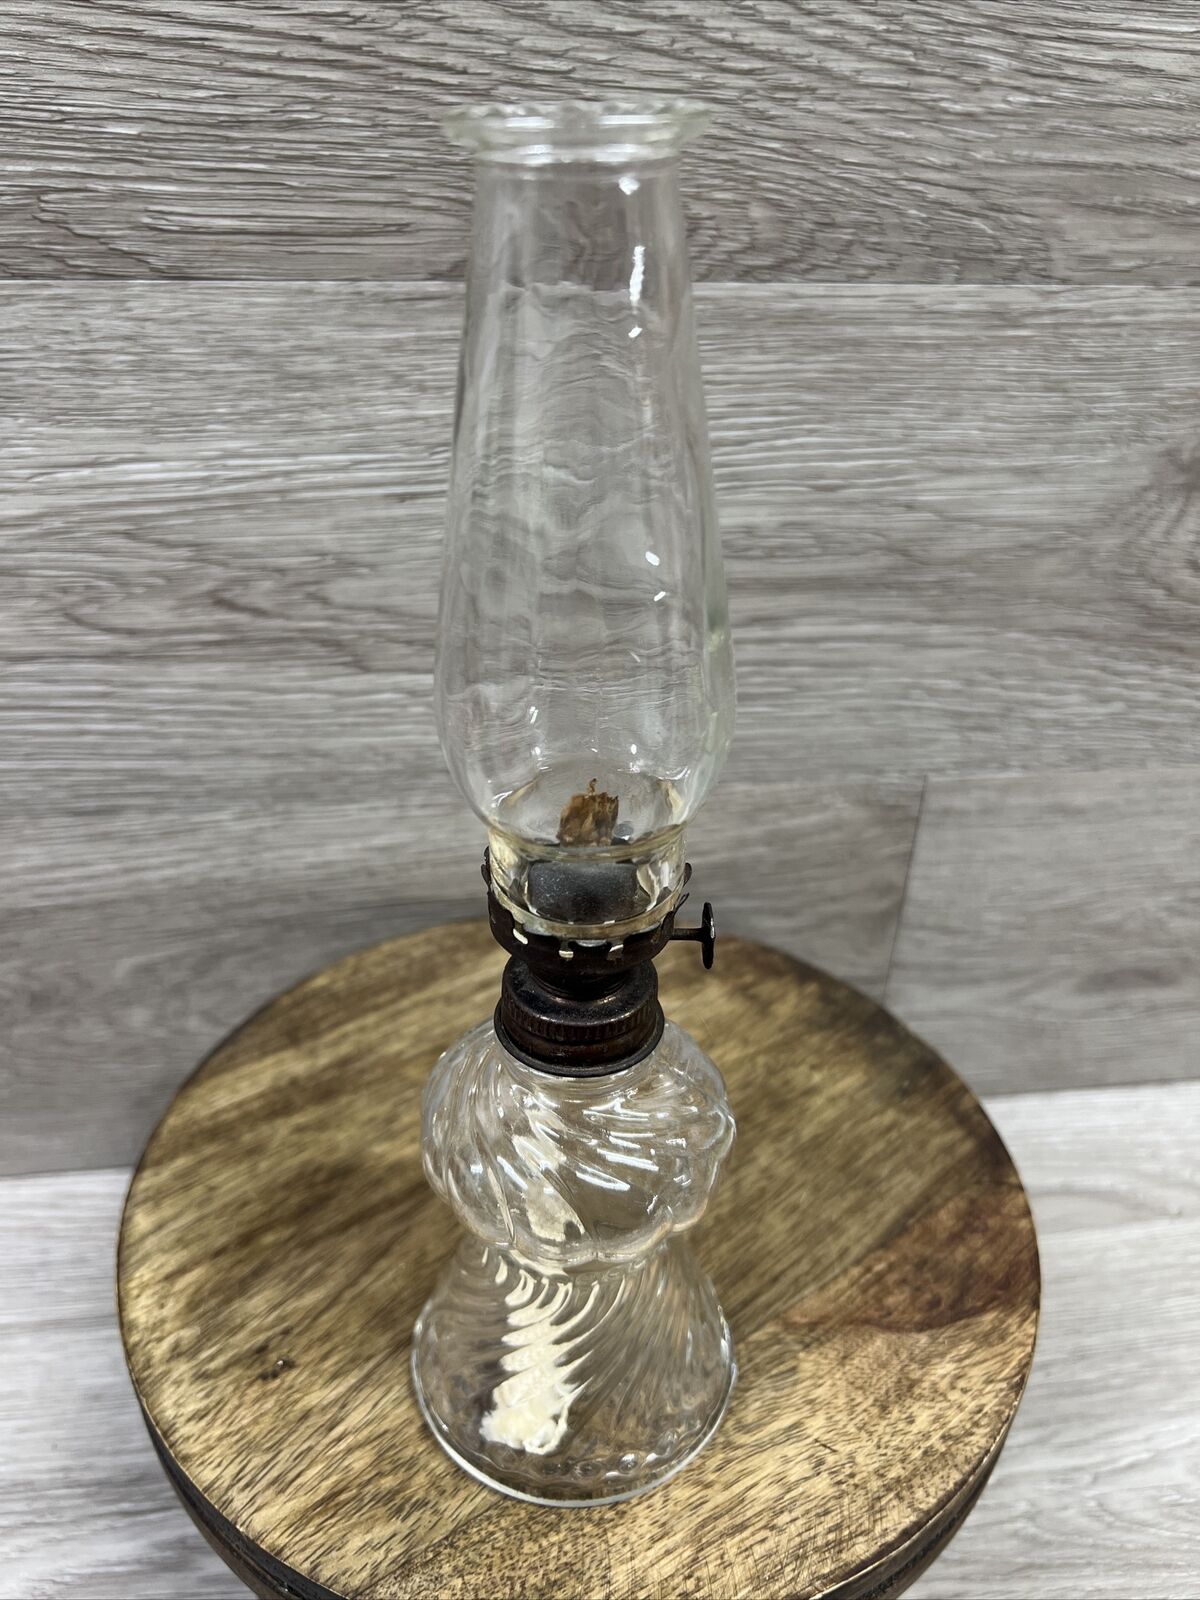 Antique/Vintage Small Swirled Glass Oil Lamp With Clear Swirled Glass Chimney #2